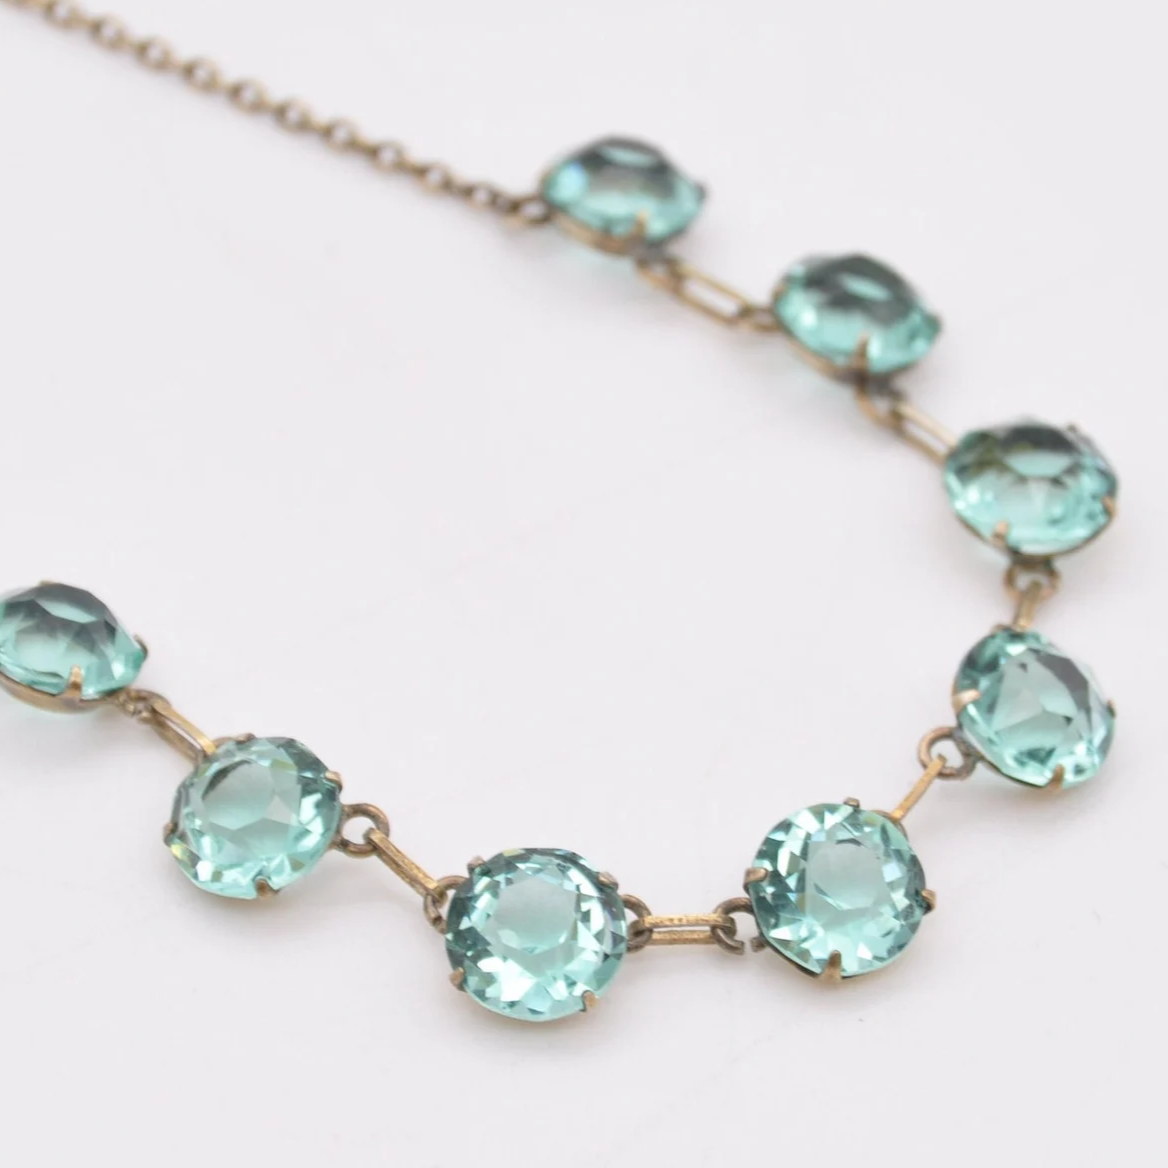 PALE BLUE GLASS NECKLACE<br>ペールブルー・グラス・ネックレス